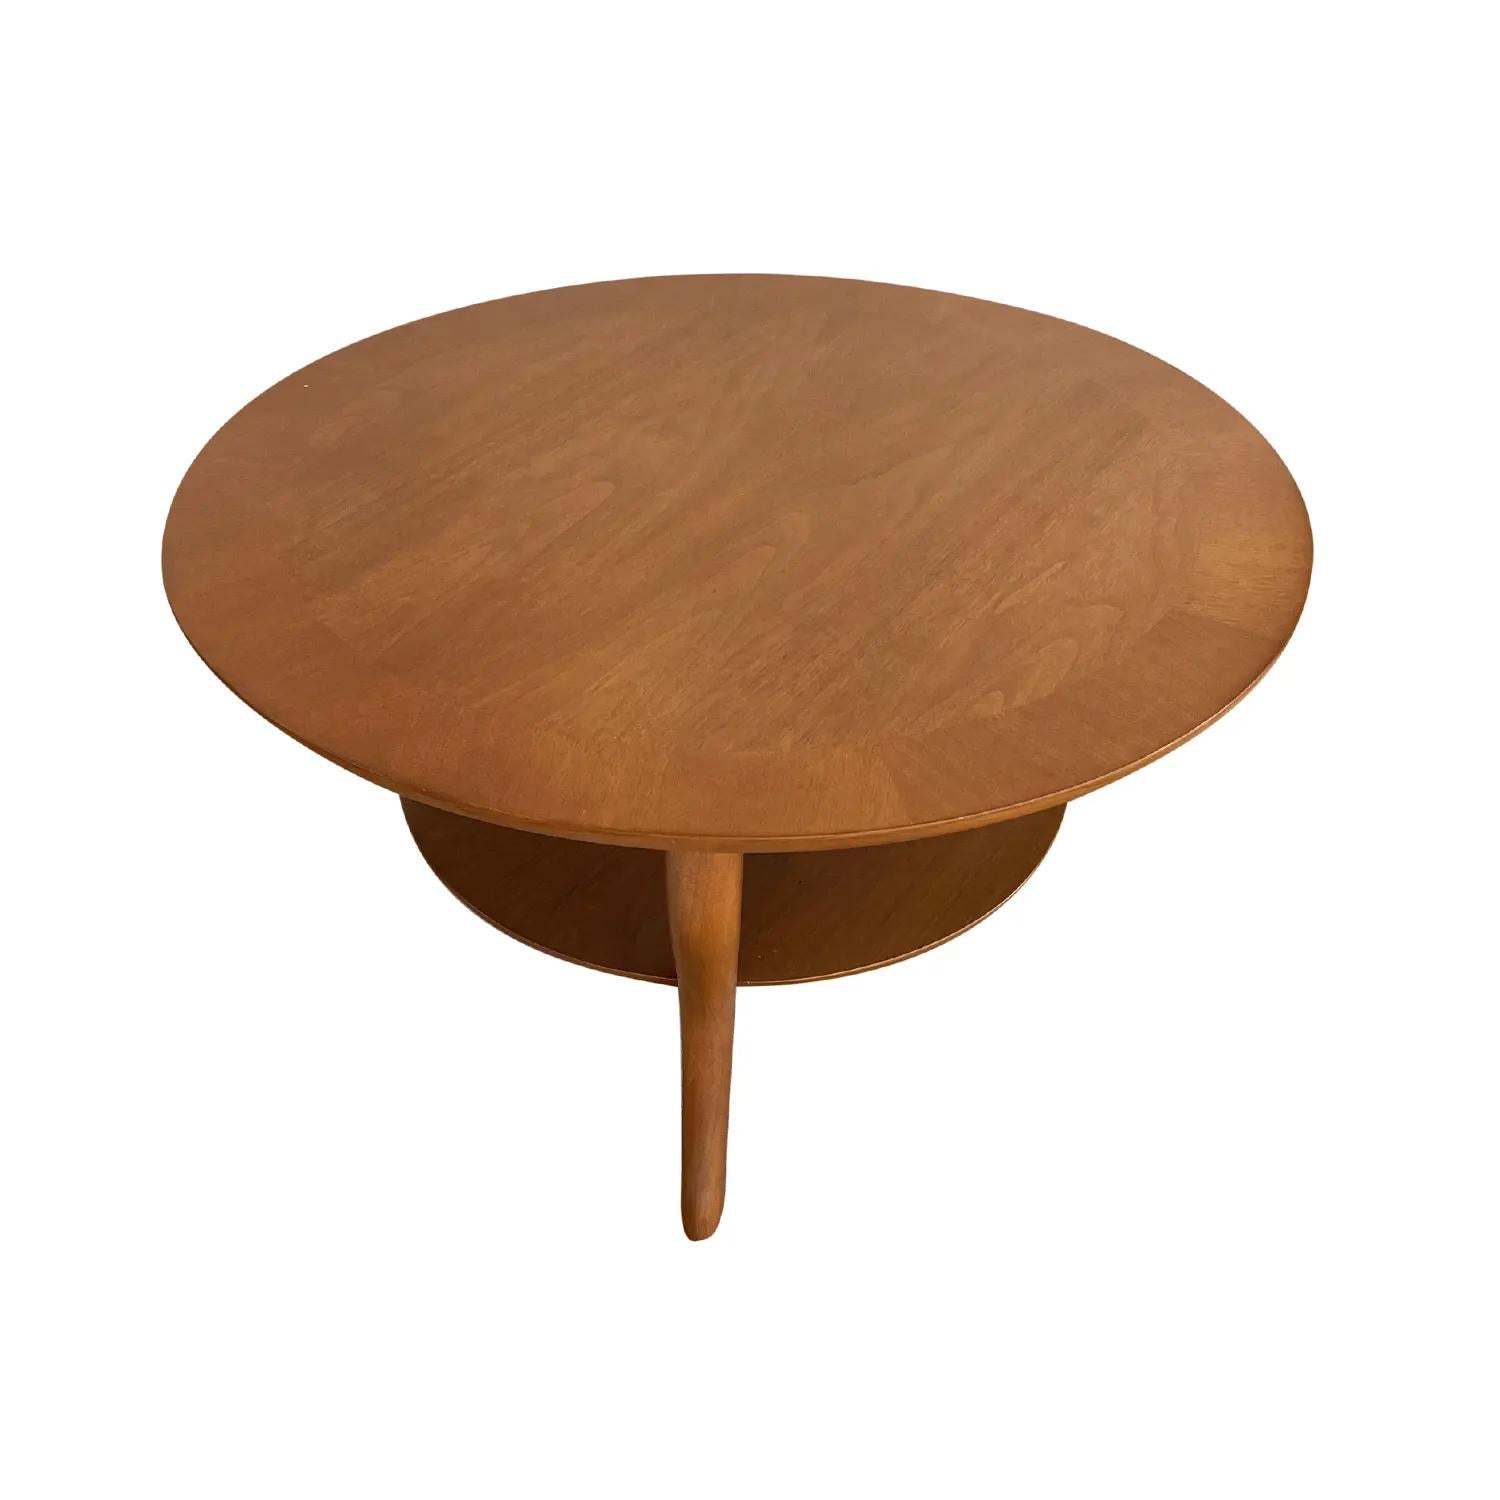 20th Century American Widdicomb Walnut Cocktail Table by T.H. Robsjohn-Gibbings In Good Condition For Sale In West Palm Beach, FL